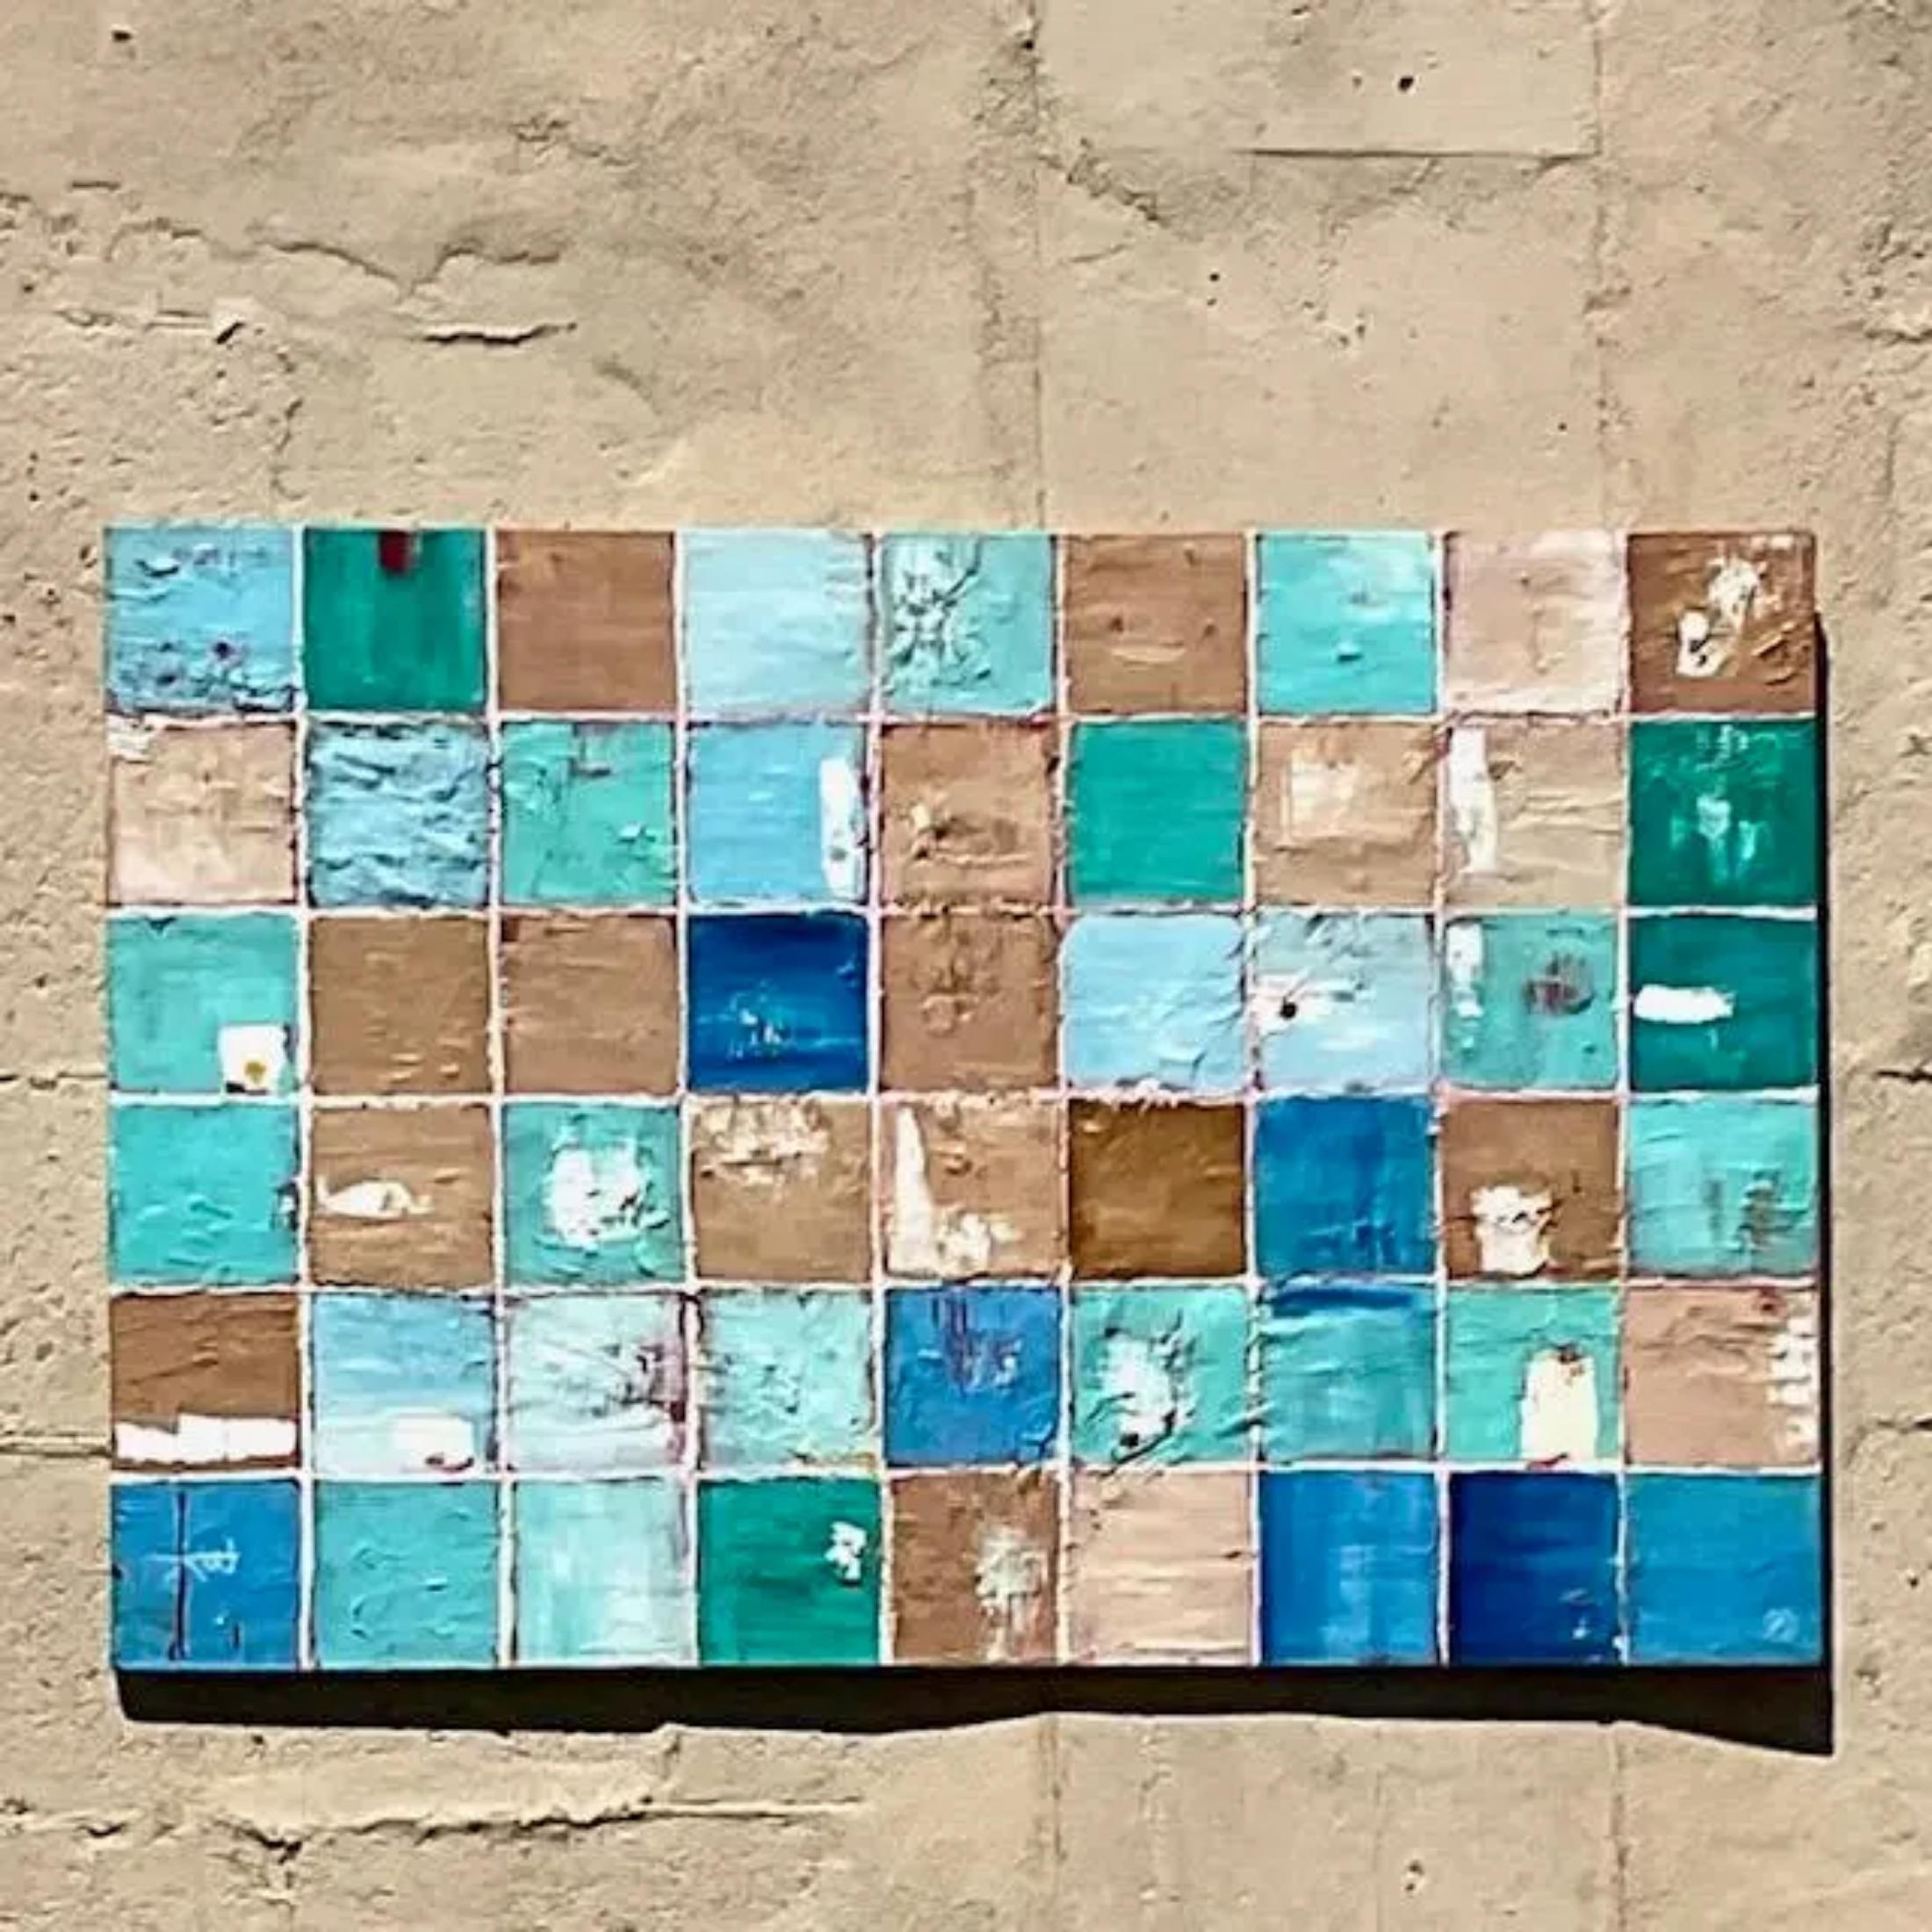 A fantastic vintage Boho original oil painting on canvas. A chic geometric abstract in pale blues and tans. Signed by the artist. Acquired from a Palm Beach estate